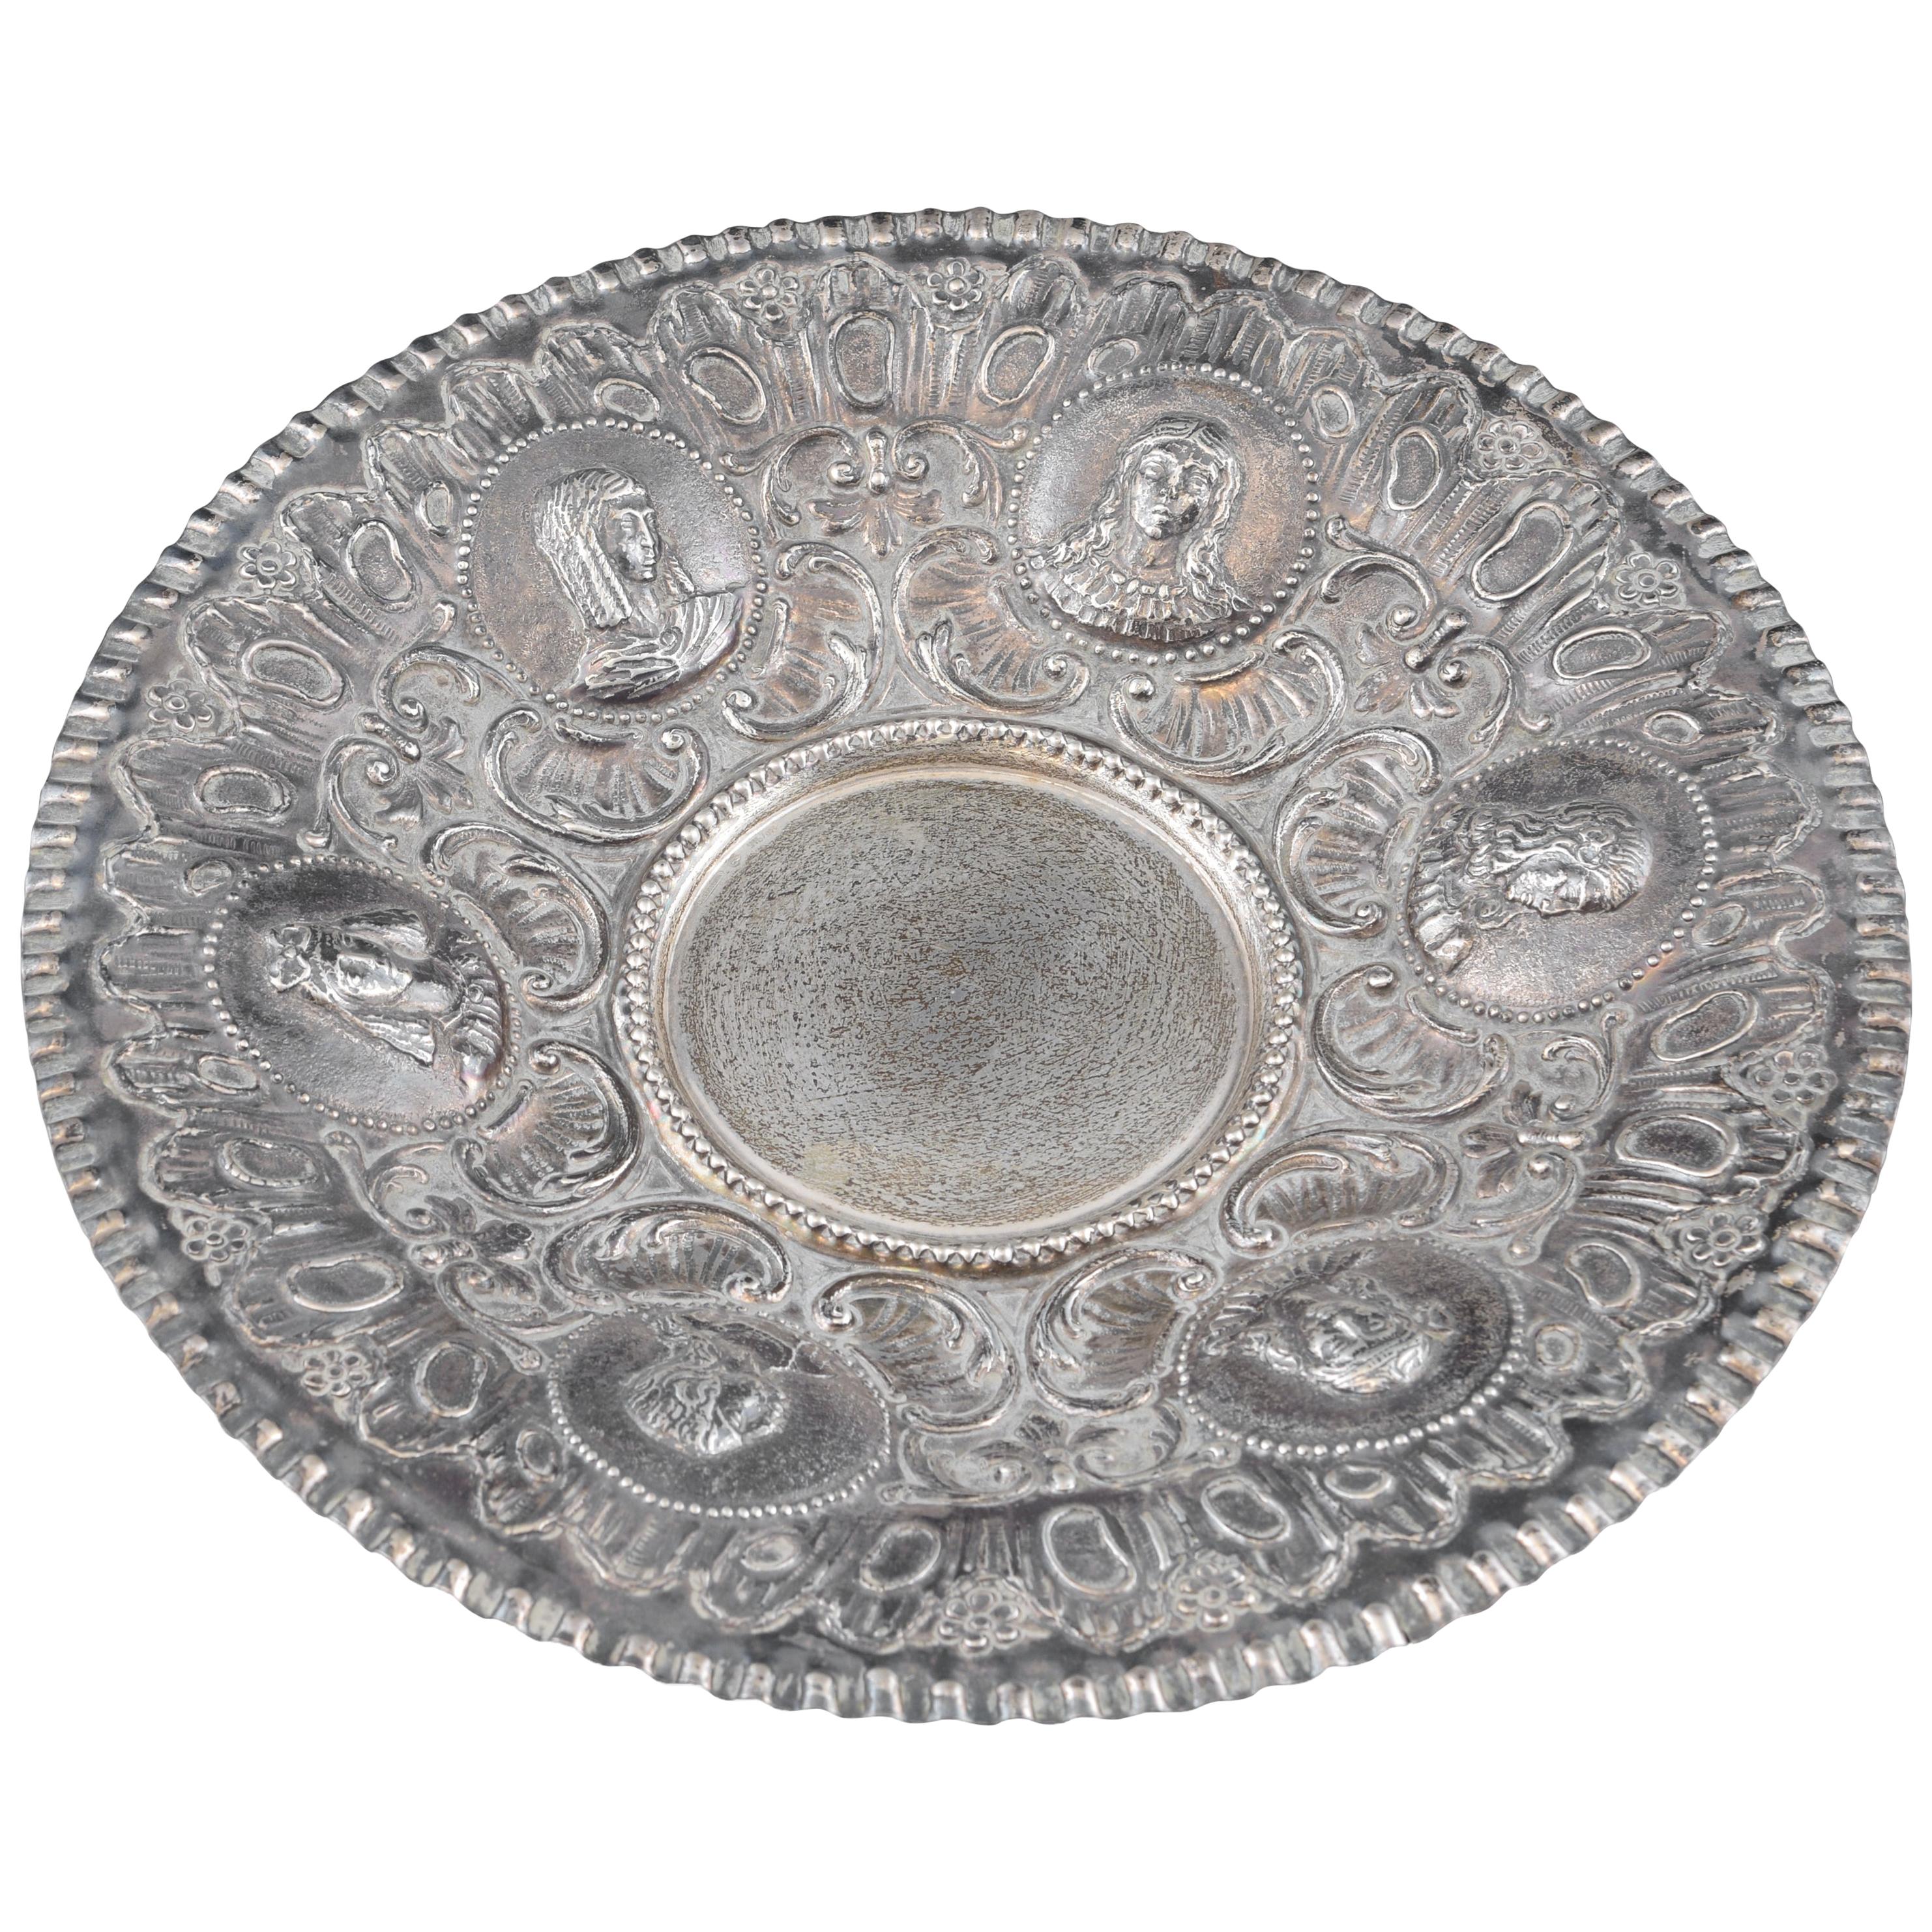 Solid Silver Tray, after 18th Century Models, 20th Century